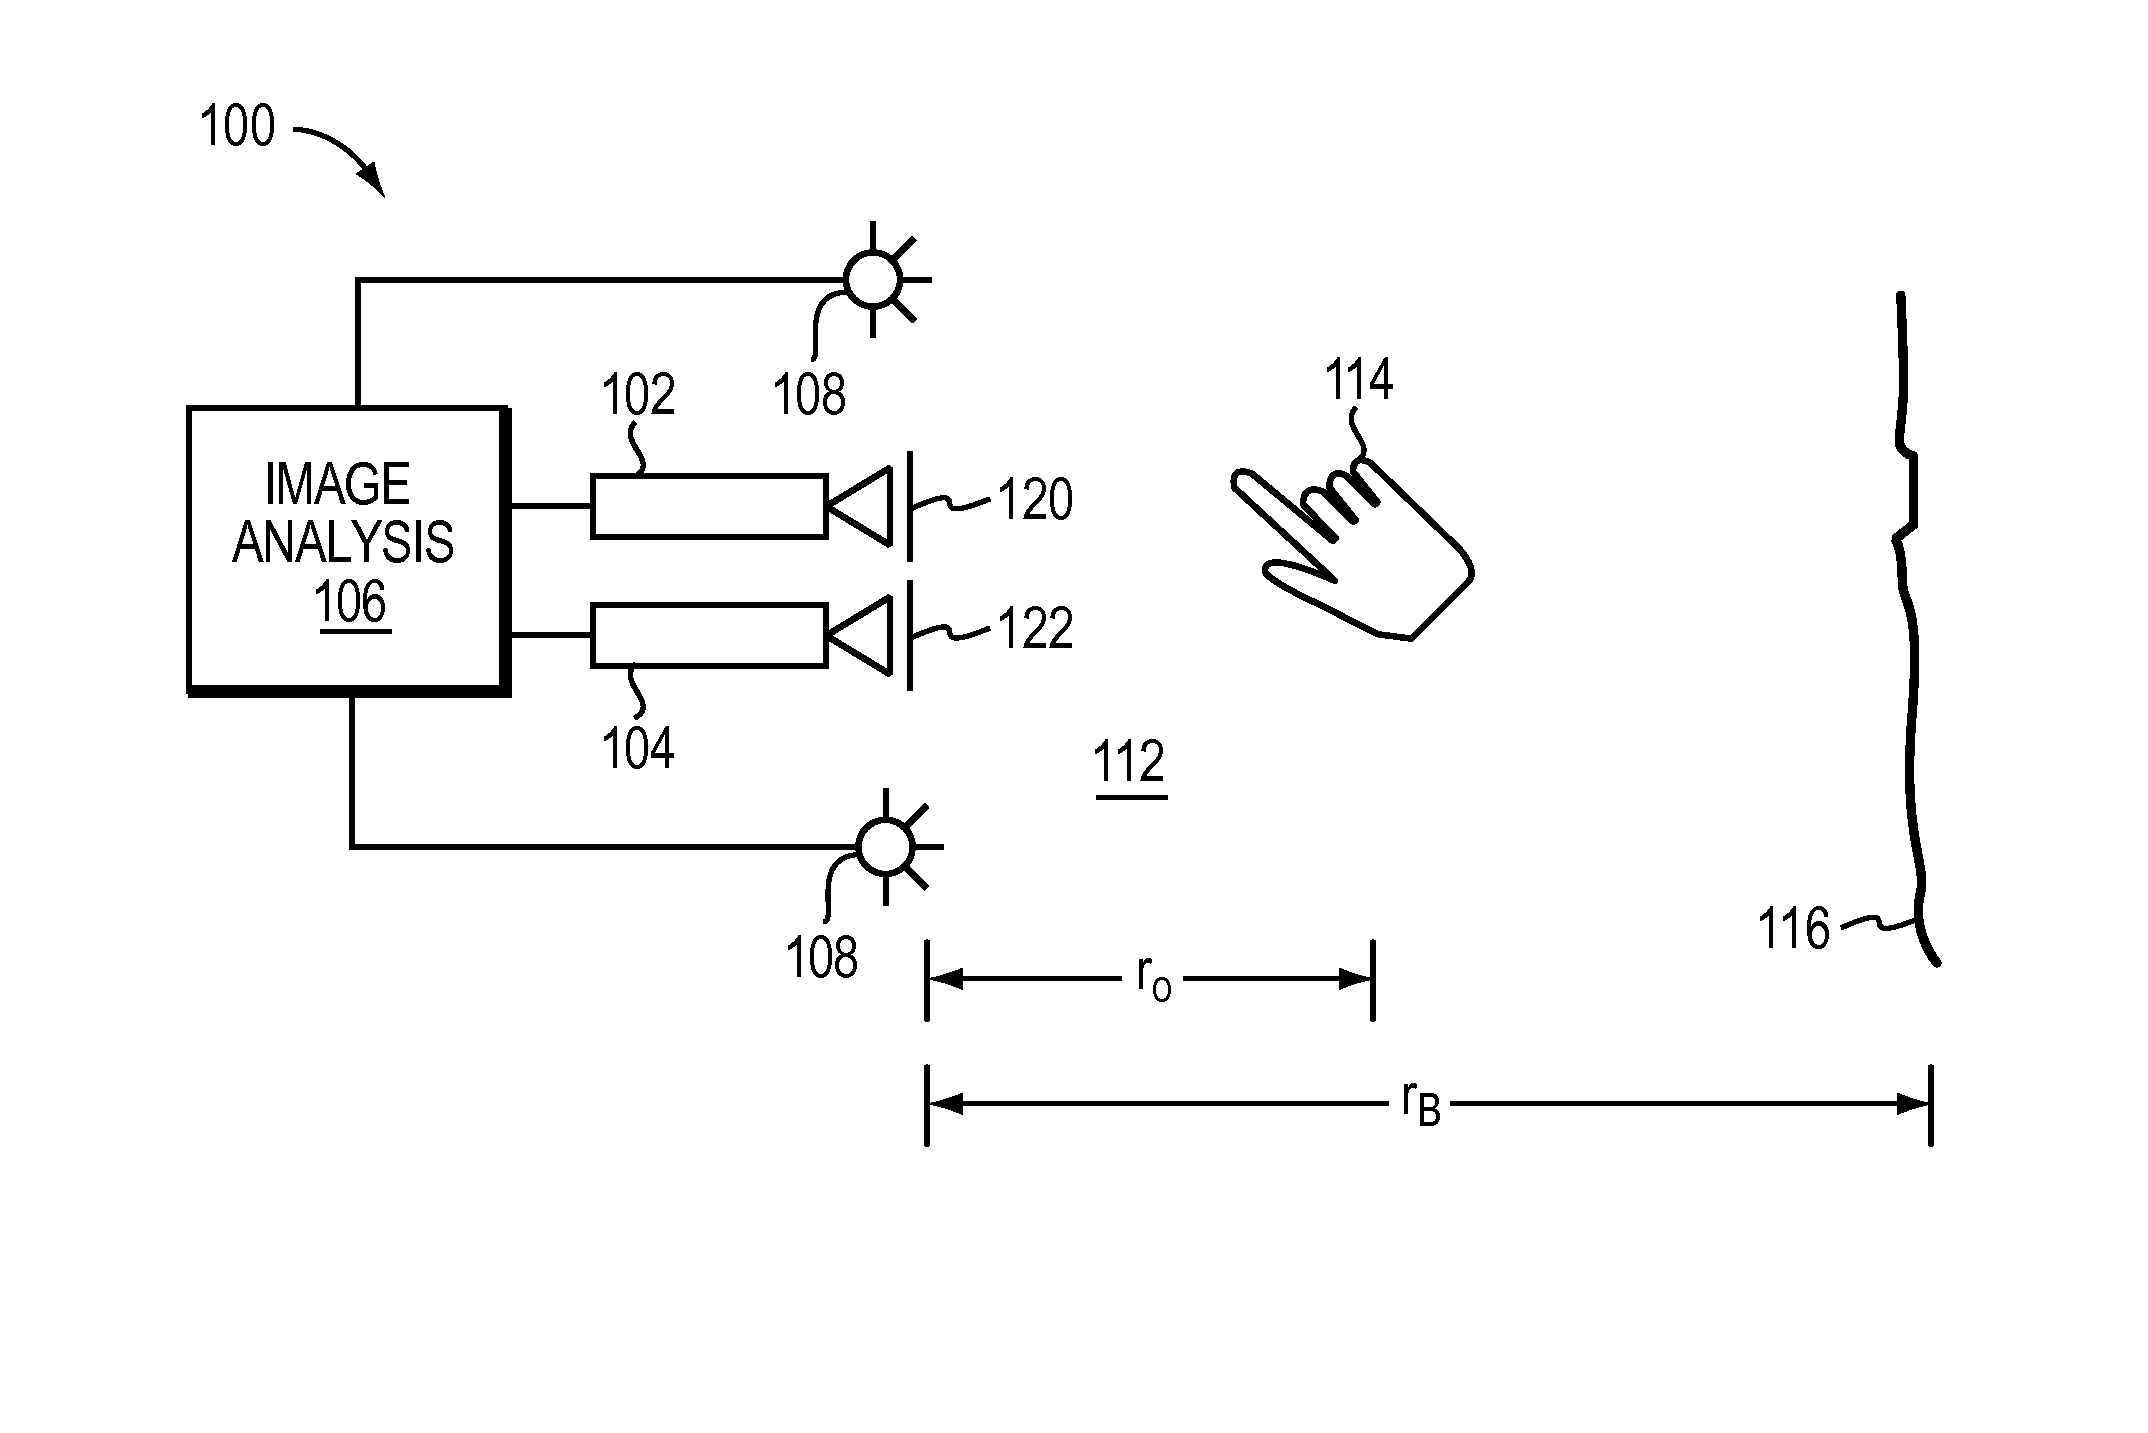 Object detection and tracking with variable-field illumination devices